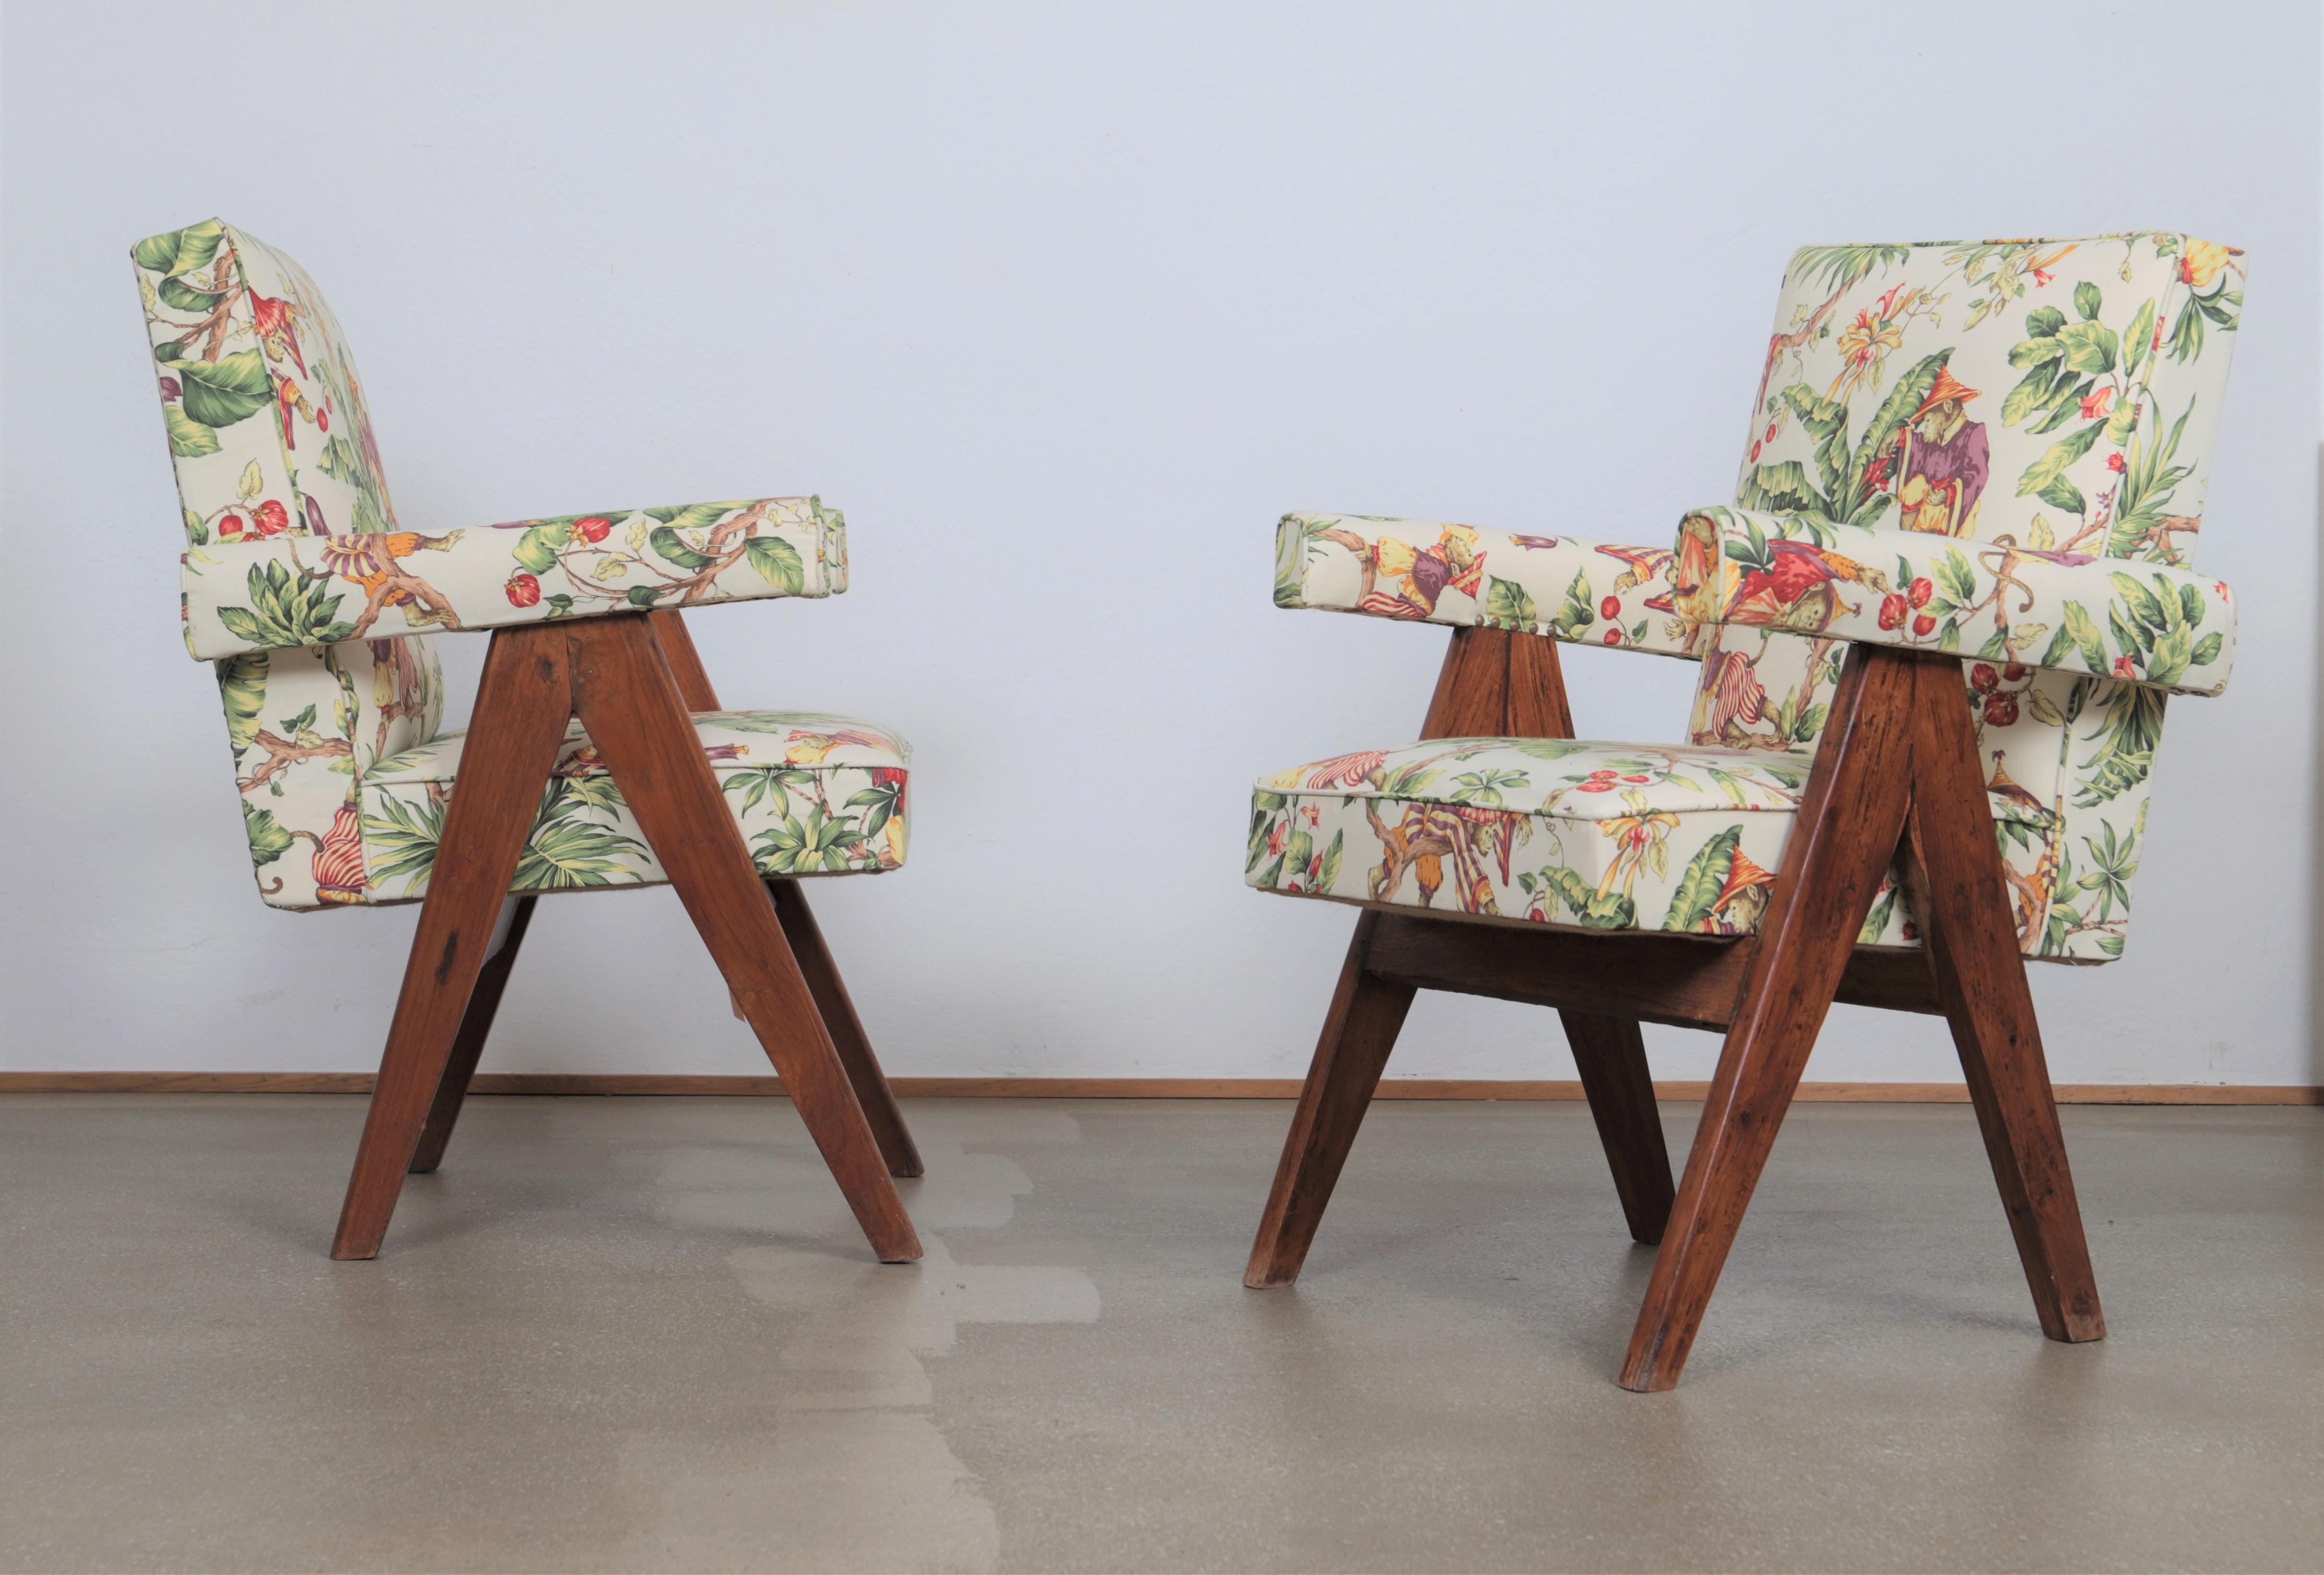 Set of two senate-committee teak chairs, flat inclined backrest, compass base with tapered legs.
Detached armrests with rounded. Seat, back and cuff covered with restored tropical fabric,
circa 1955.

Measures: Height 85 x weight 60 x depth 58